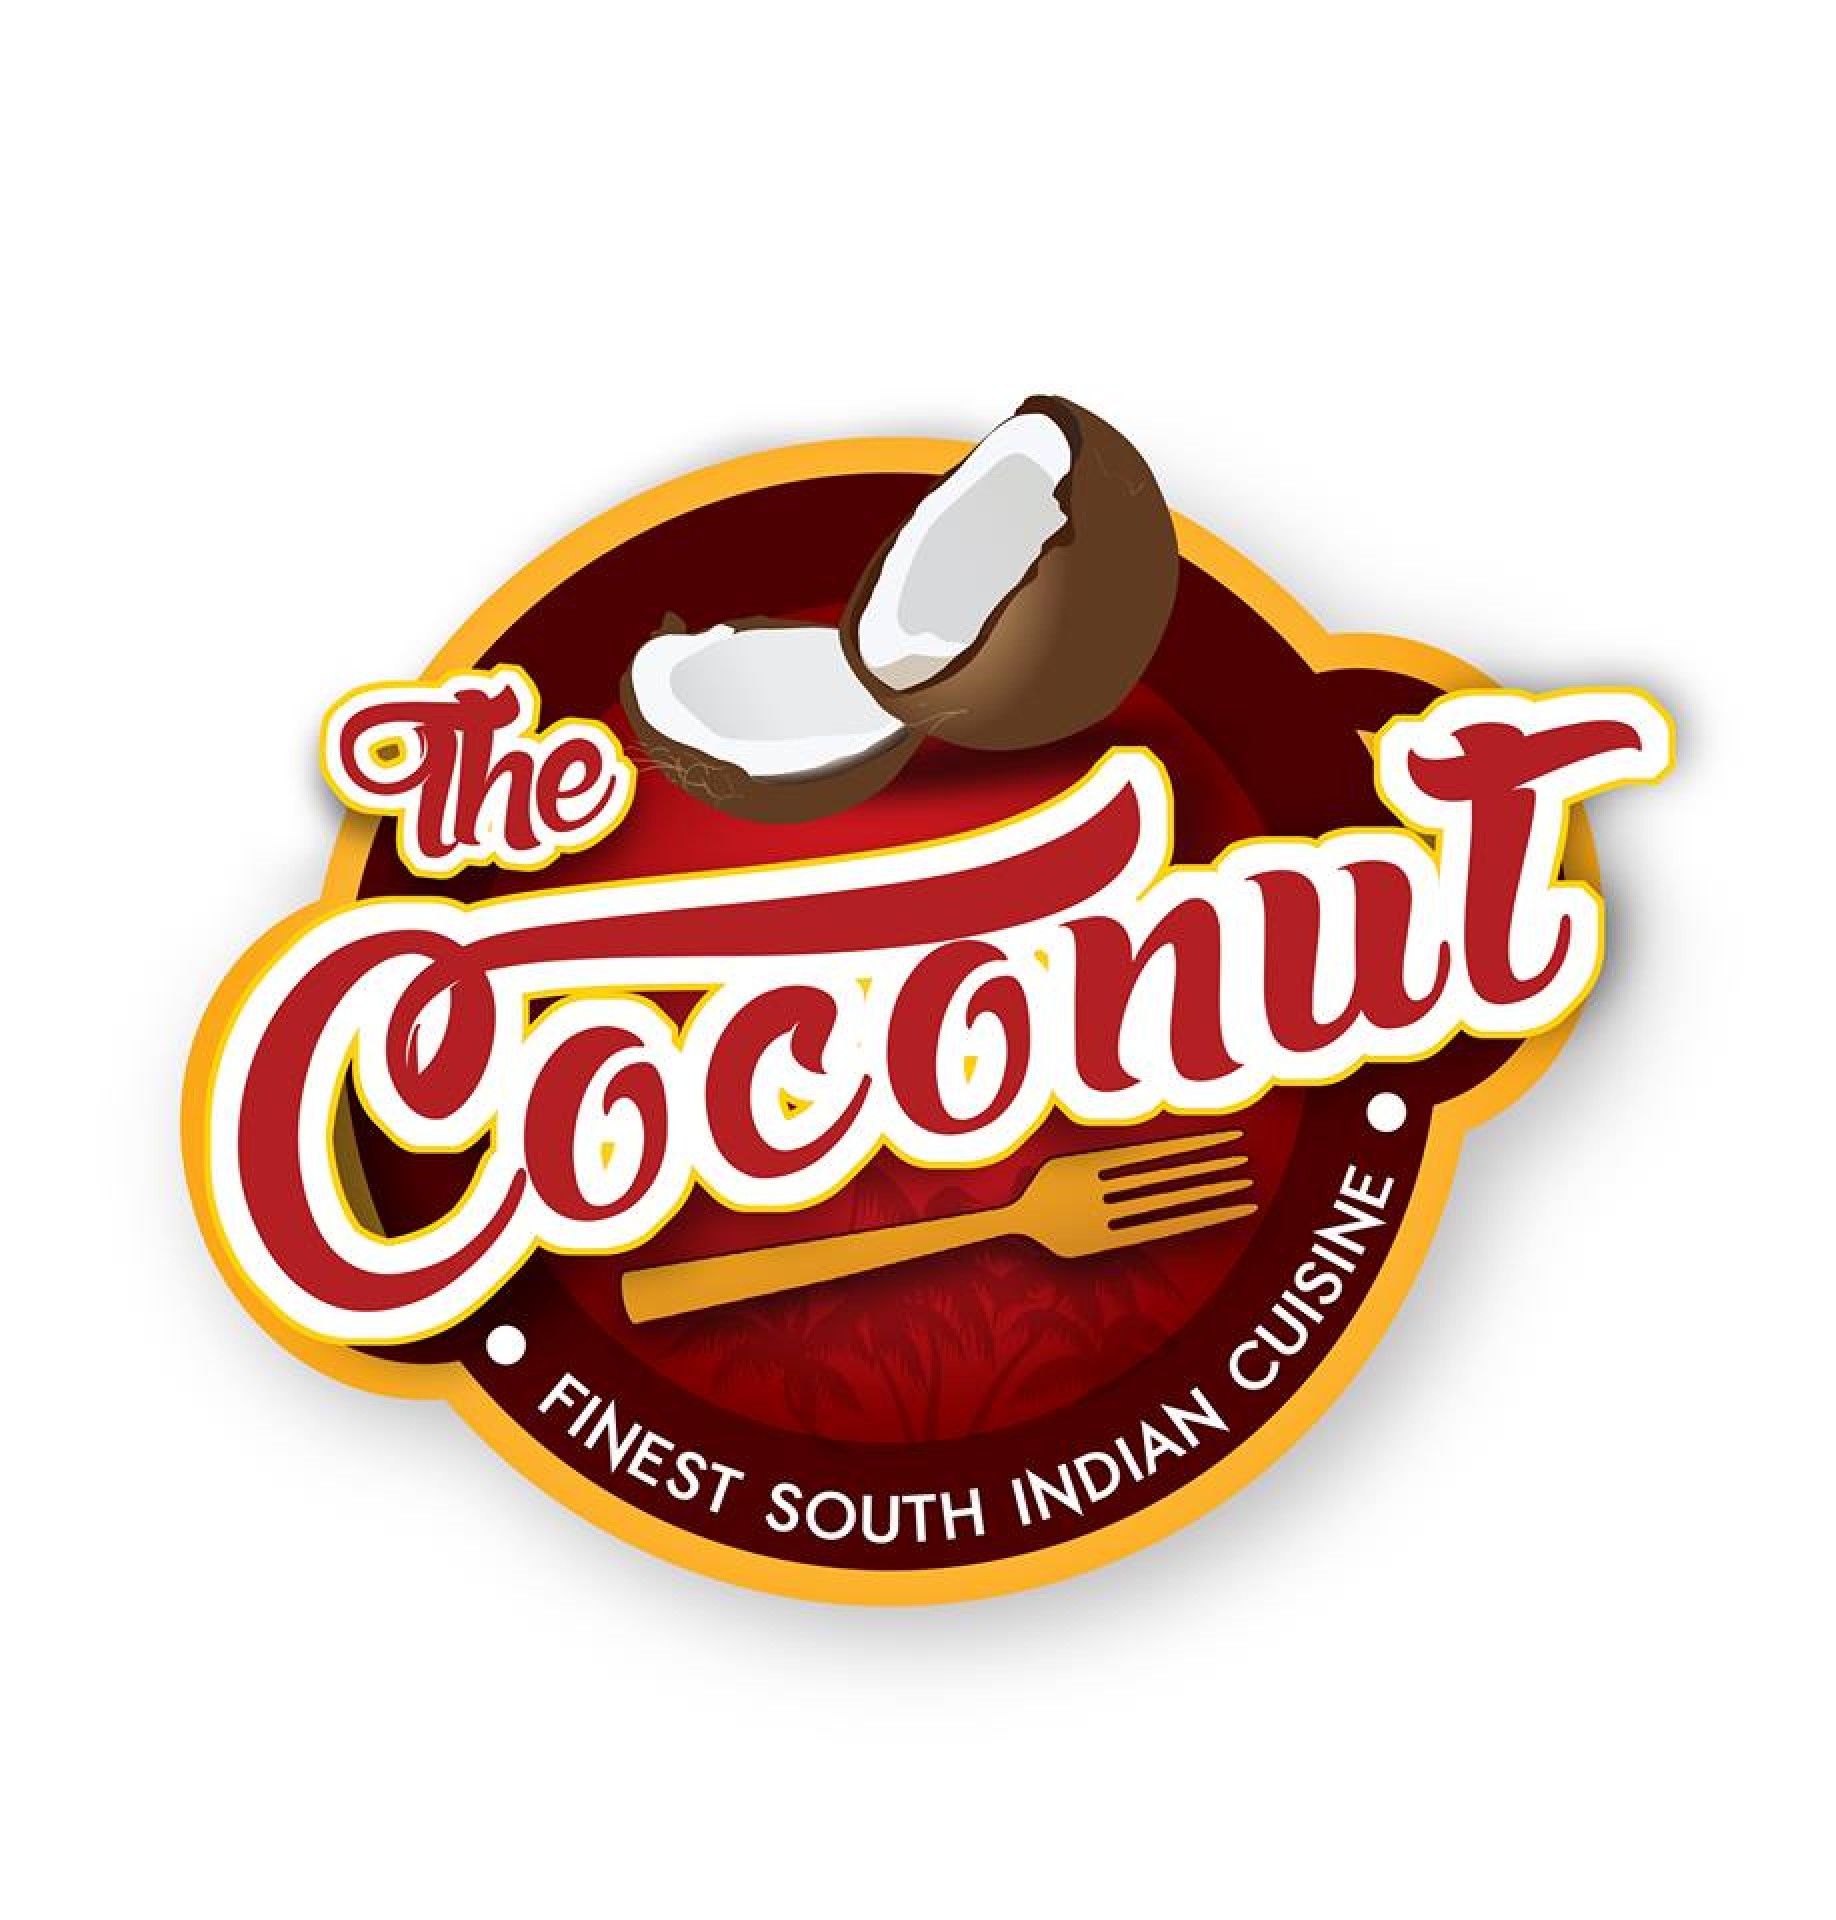 The Coconut Finest South Indian Cuisine